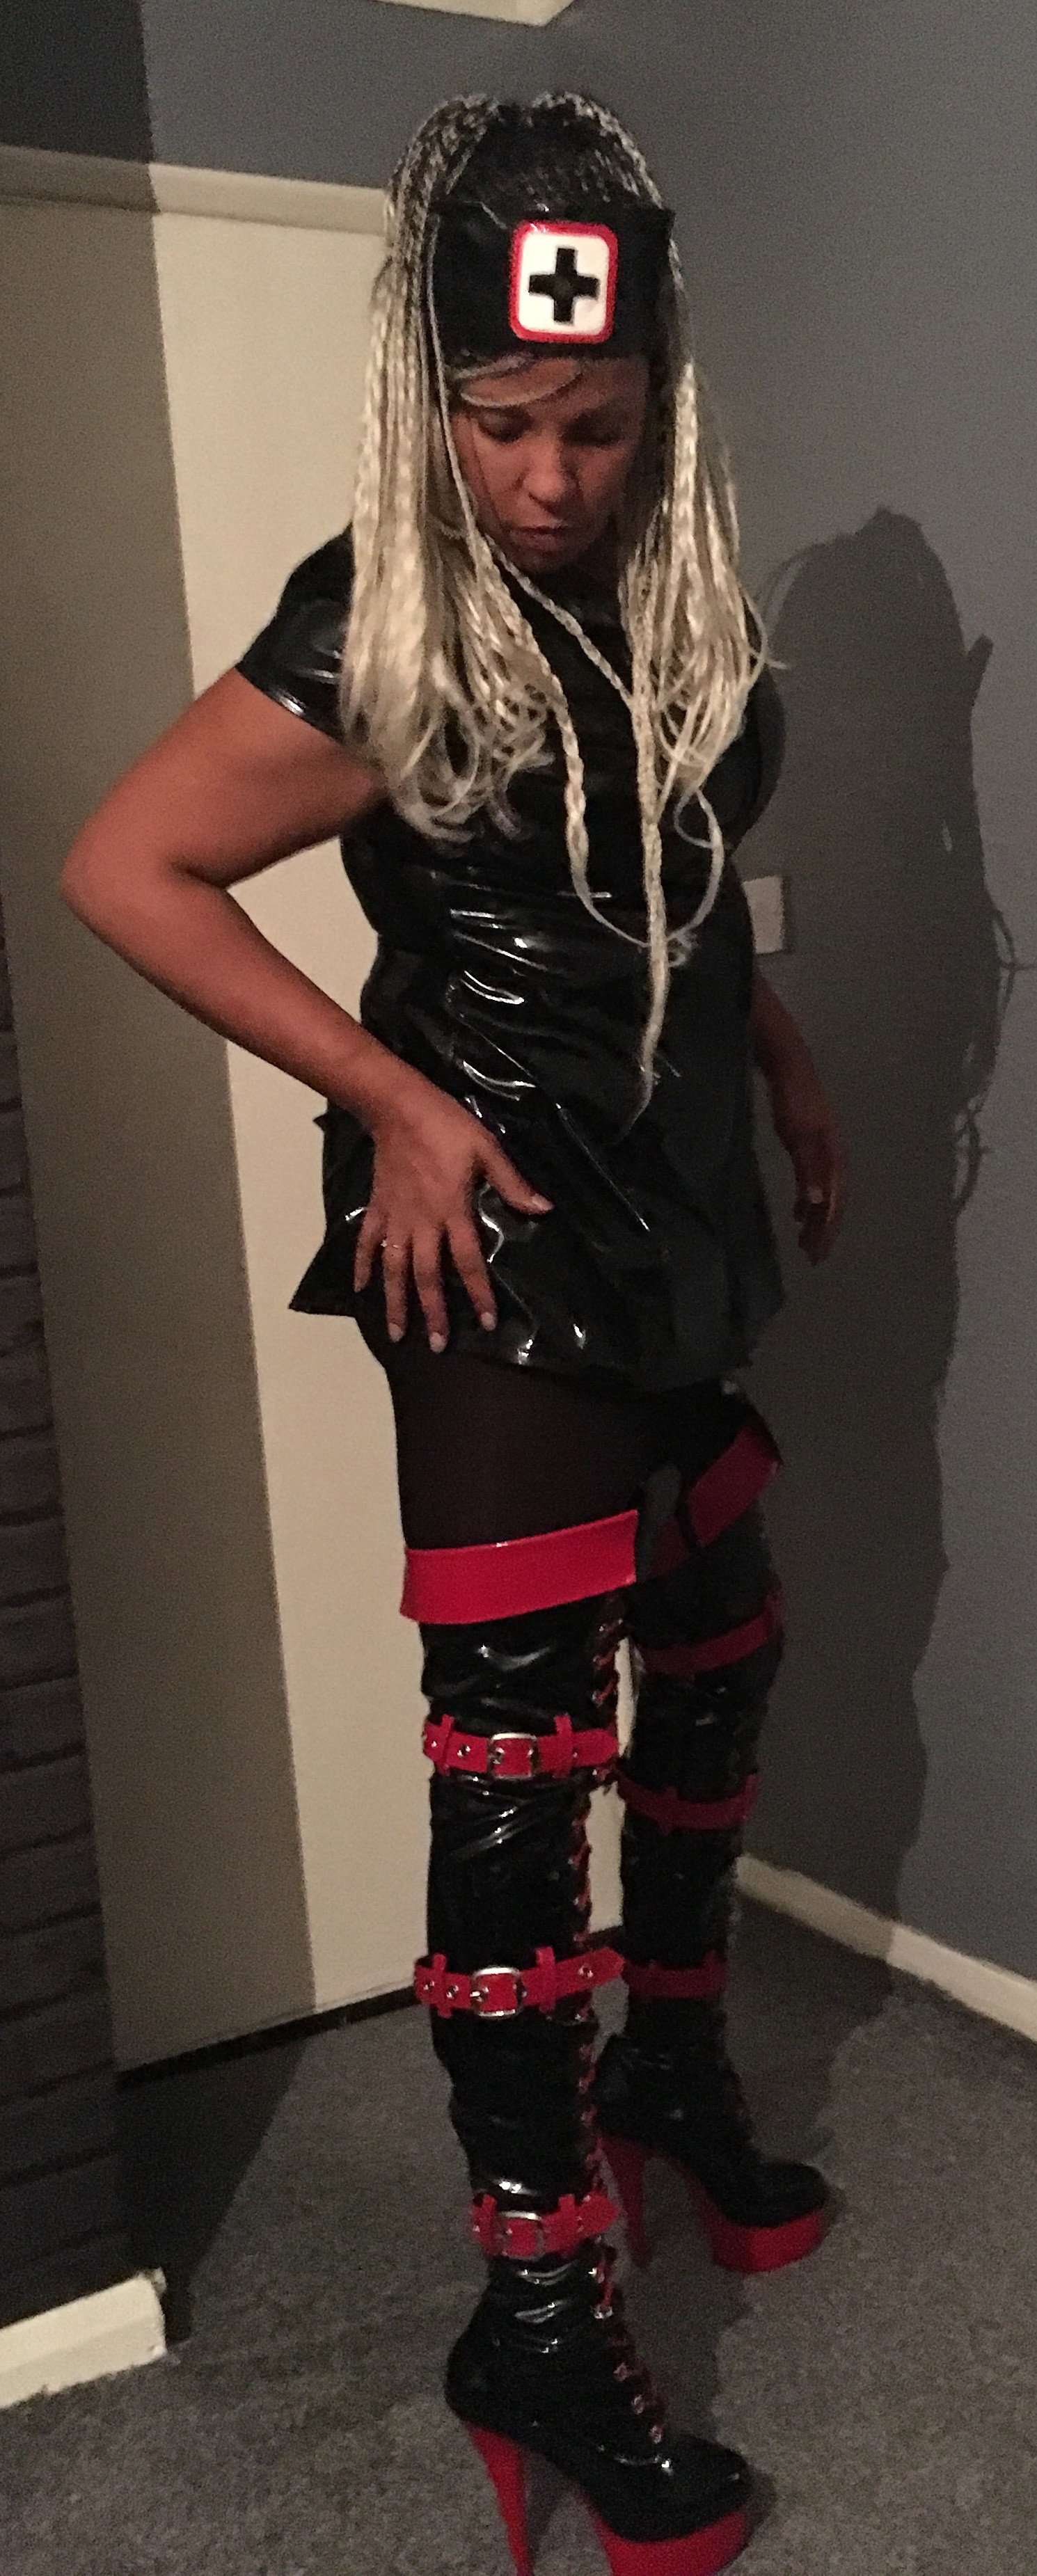 Photo by MistressMD with the username @MistressMD, who is a star user,  May 5, 2020 at 10:20 AM and the text says 'Still trying to catch me??? 😉👸🏾😈

Find ALL my active links here ⬇️
https://allmylinks.com/mistressmd1

#Femdom #EbonyQueen #Dominatrix #Wrestler #Findom #FetishModel #BootsBoss #ContentCreator'